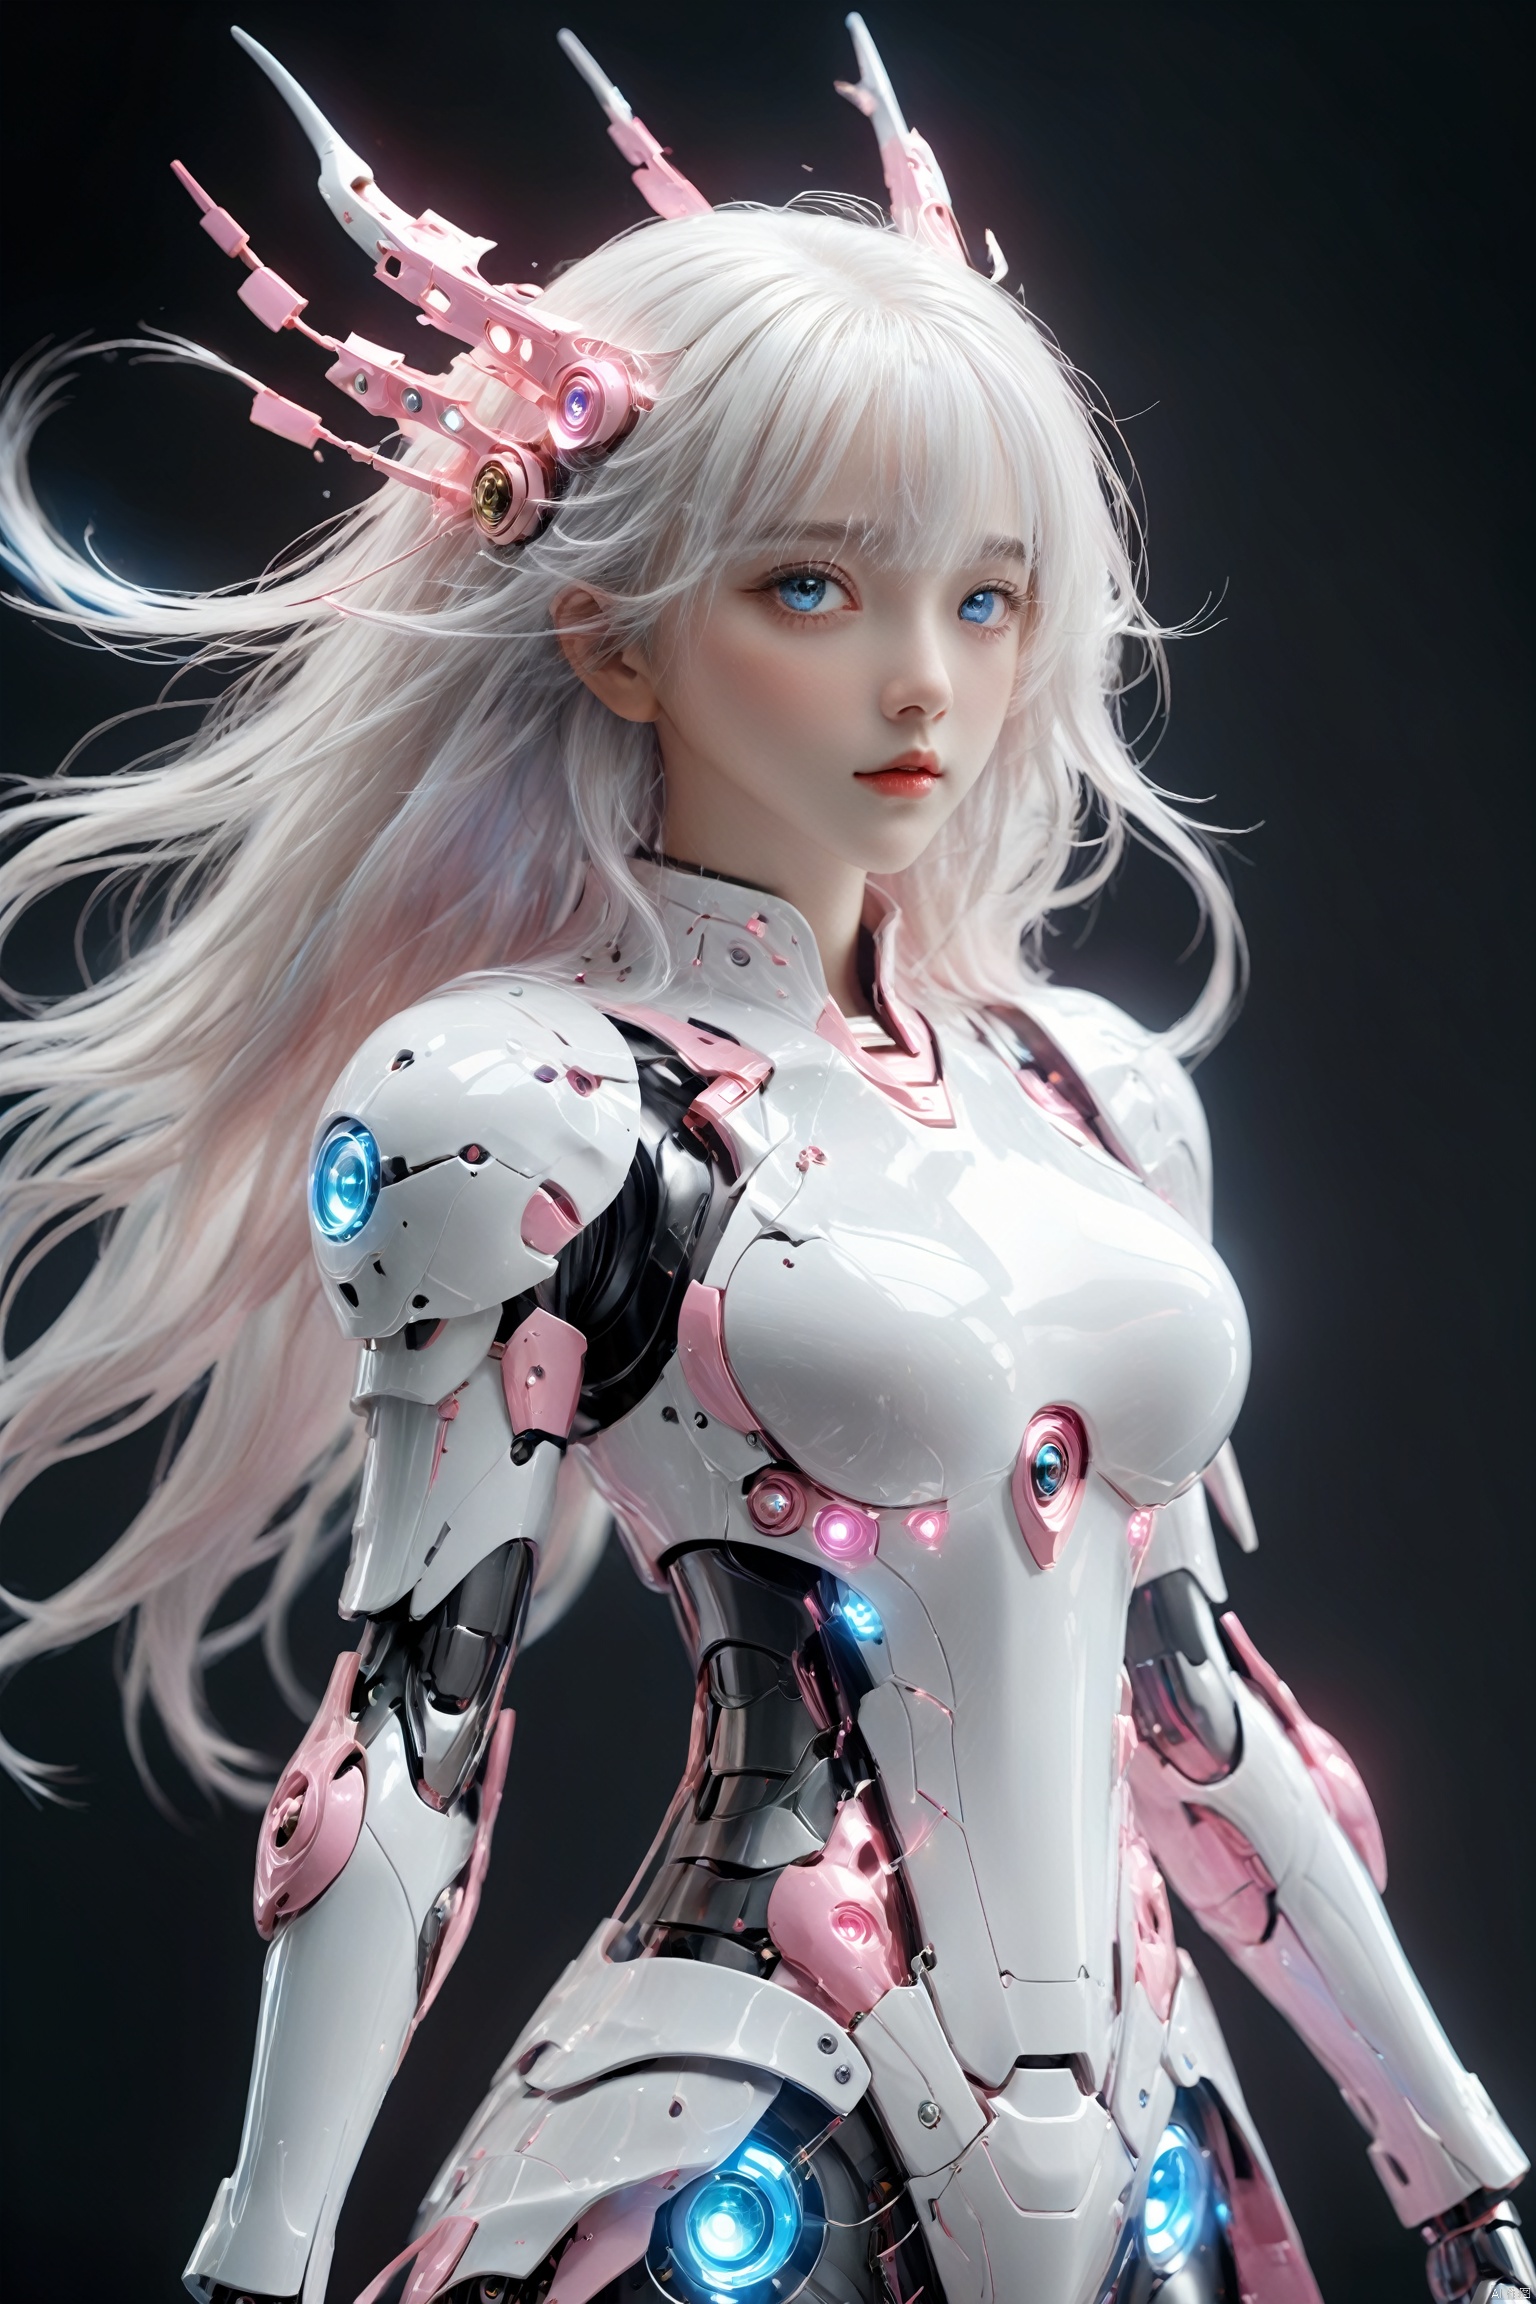  ((Masterpiece, best quality))1 girl, solo, Sports masterpiece, best quality, ultra high res, (extreme detailed), ((long white hair)), blue eyes, bangs, (abstract art:1.2),a cute robot woman with pink, armor,full_body, in the style of hyper-realistic sculptures, manga-inspired, monochromatic white figures, oshare kei, exacting precision, rococo, eye-catching detail